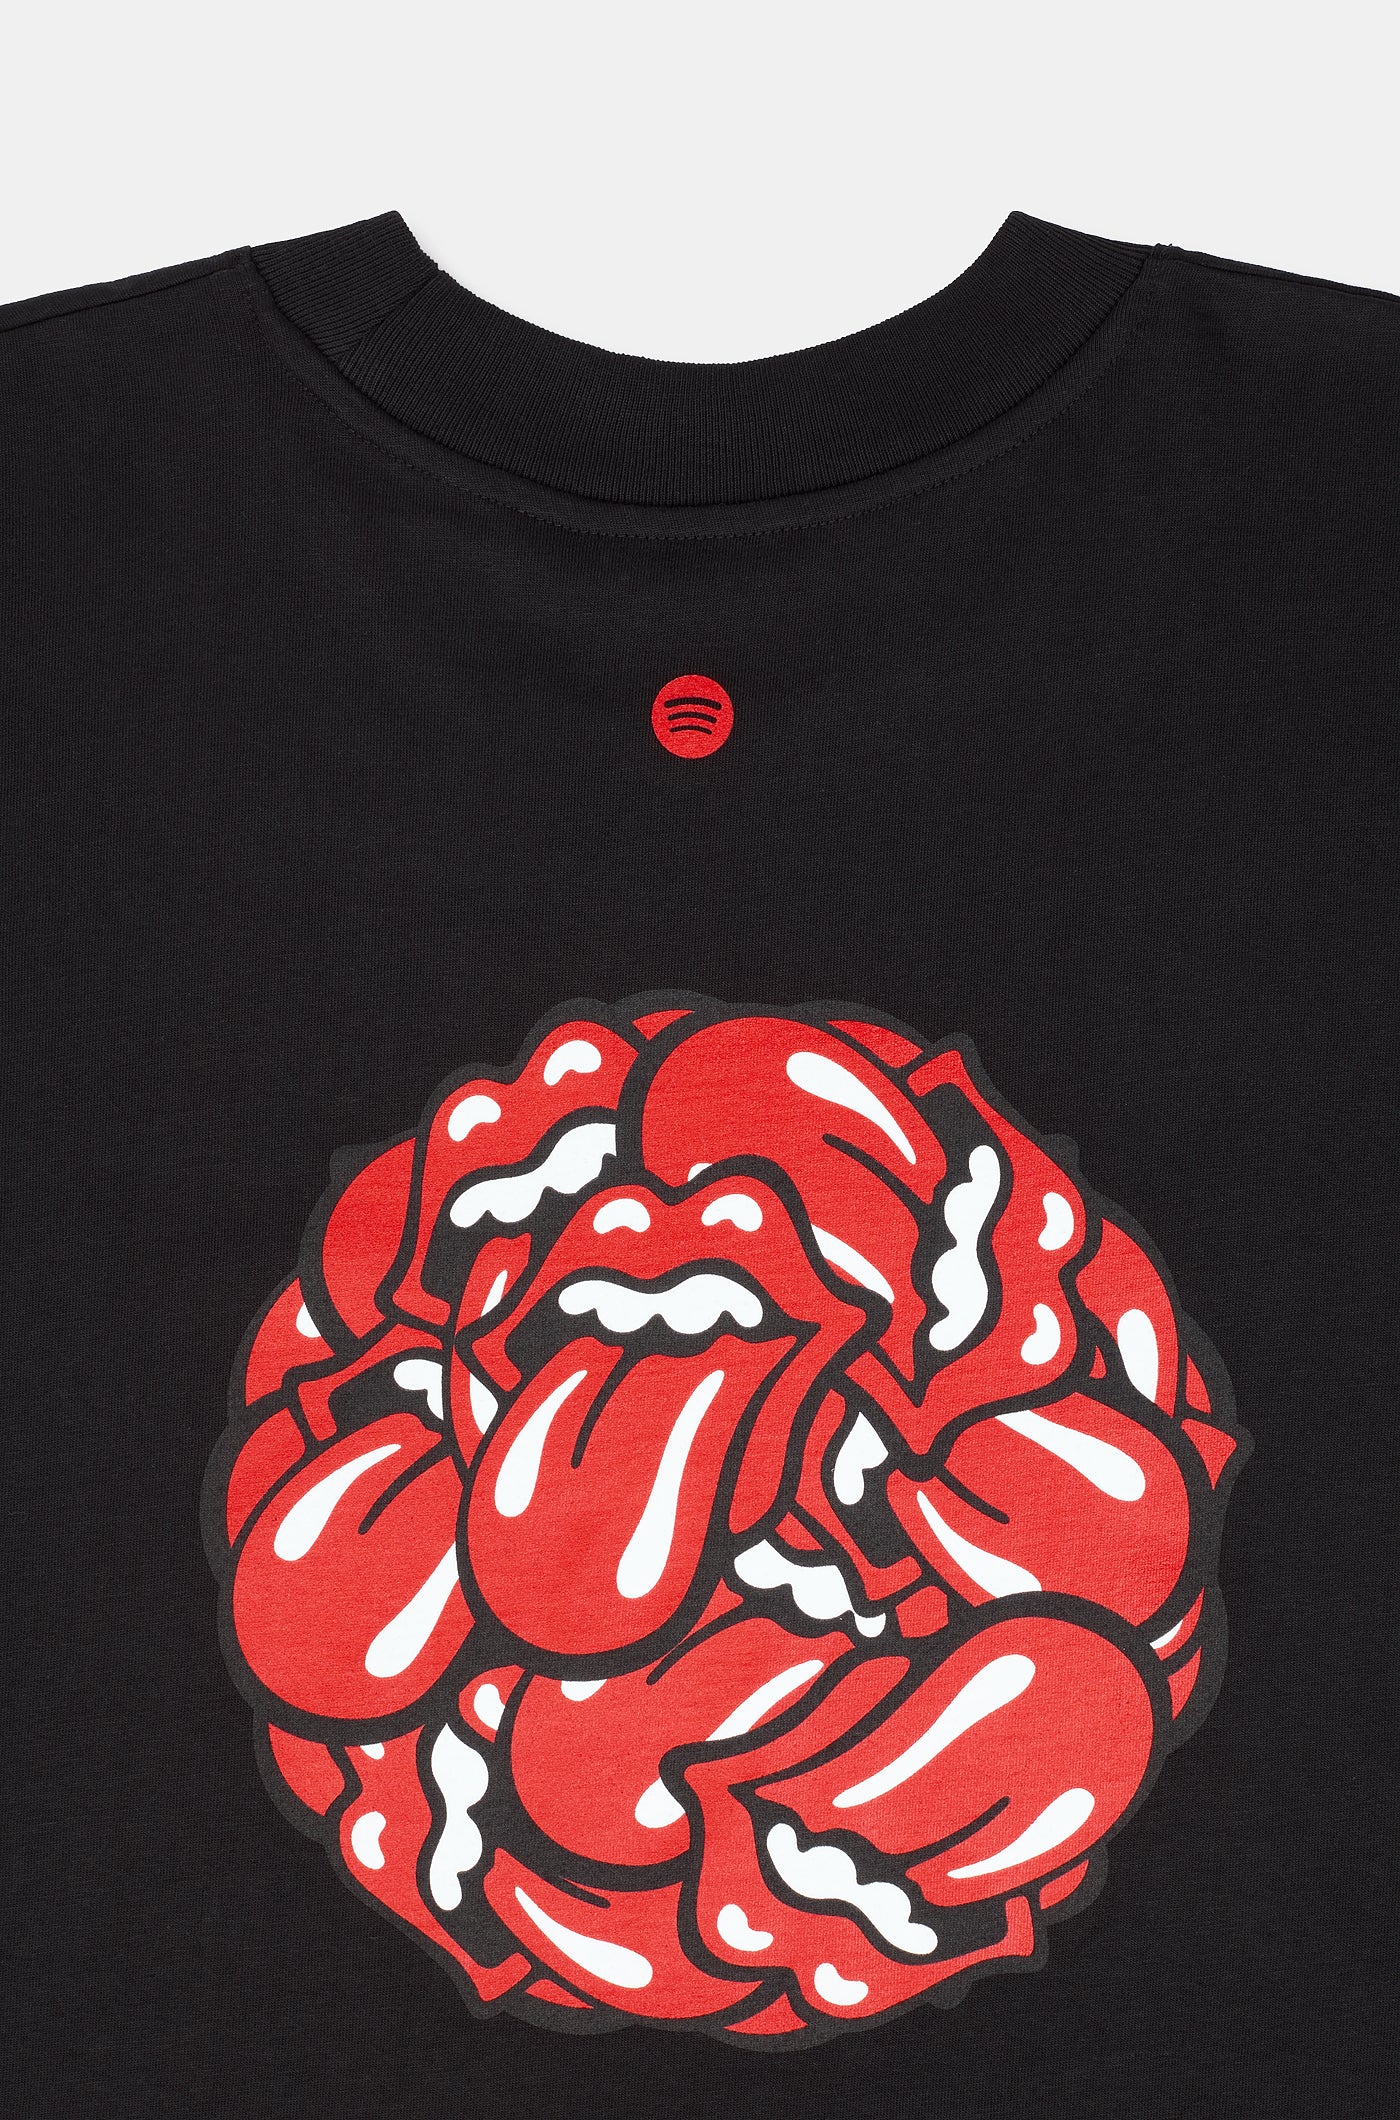 Barça x Rolling Stones limited edition t-shirt - Oversize